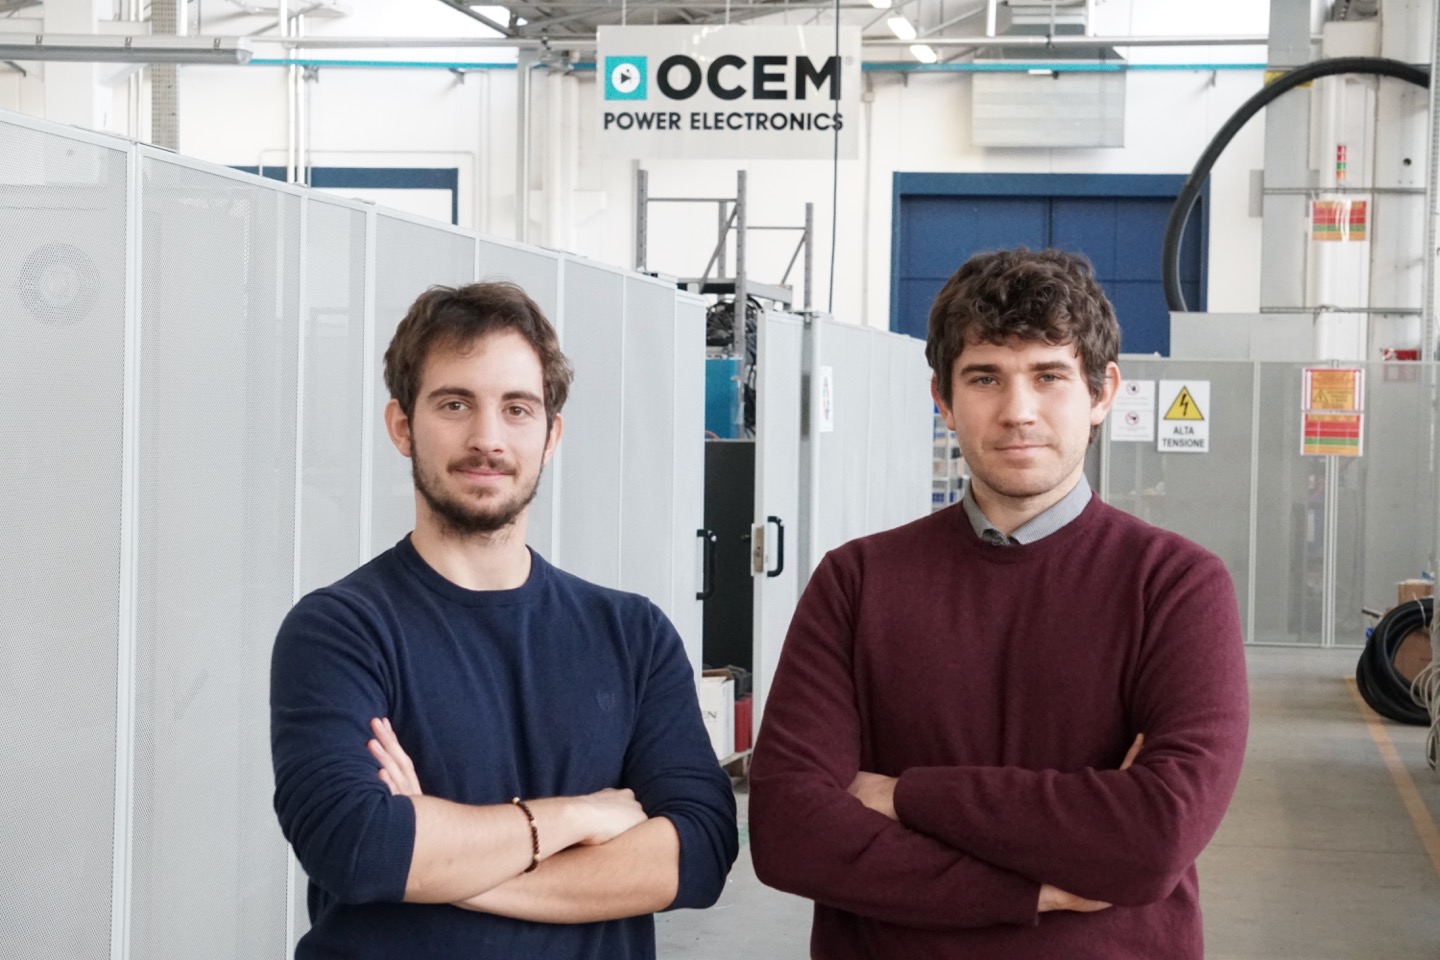 Young engineers seek to harness renewable energy with doctoral research at OCEM